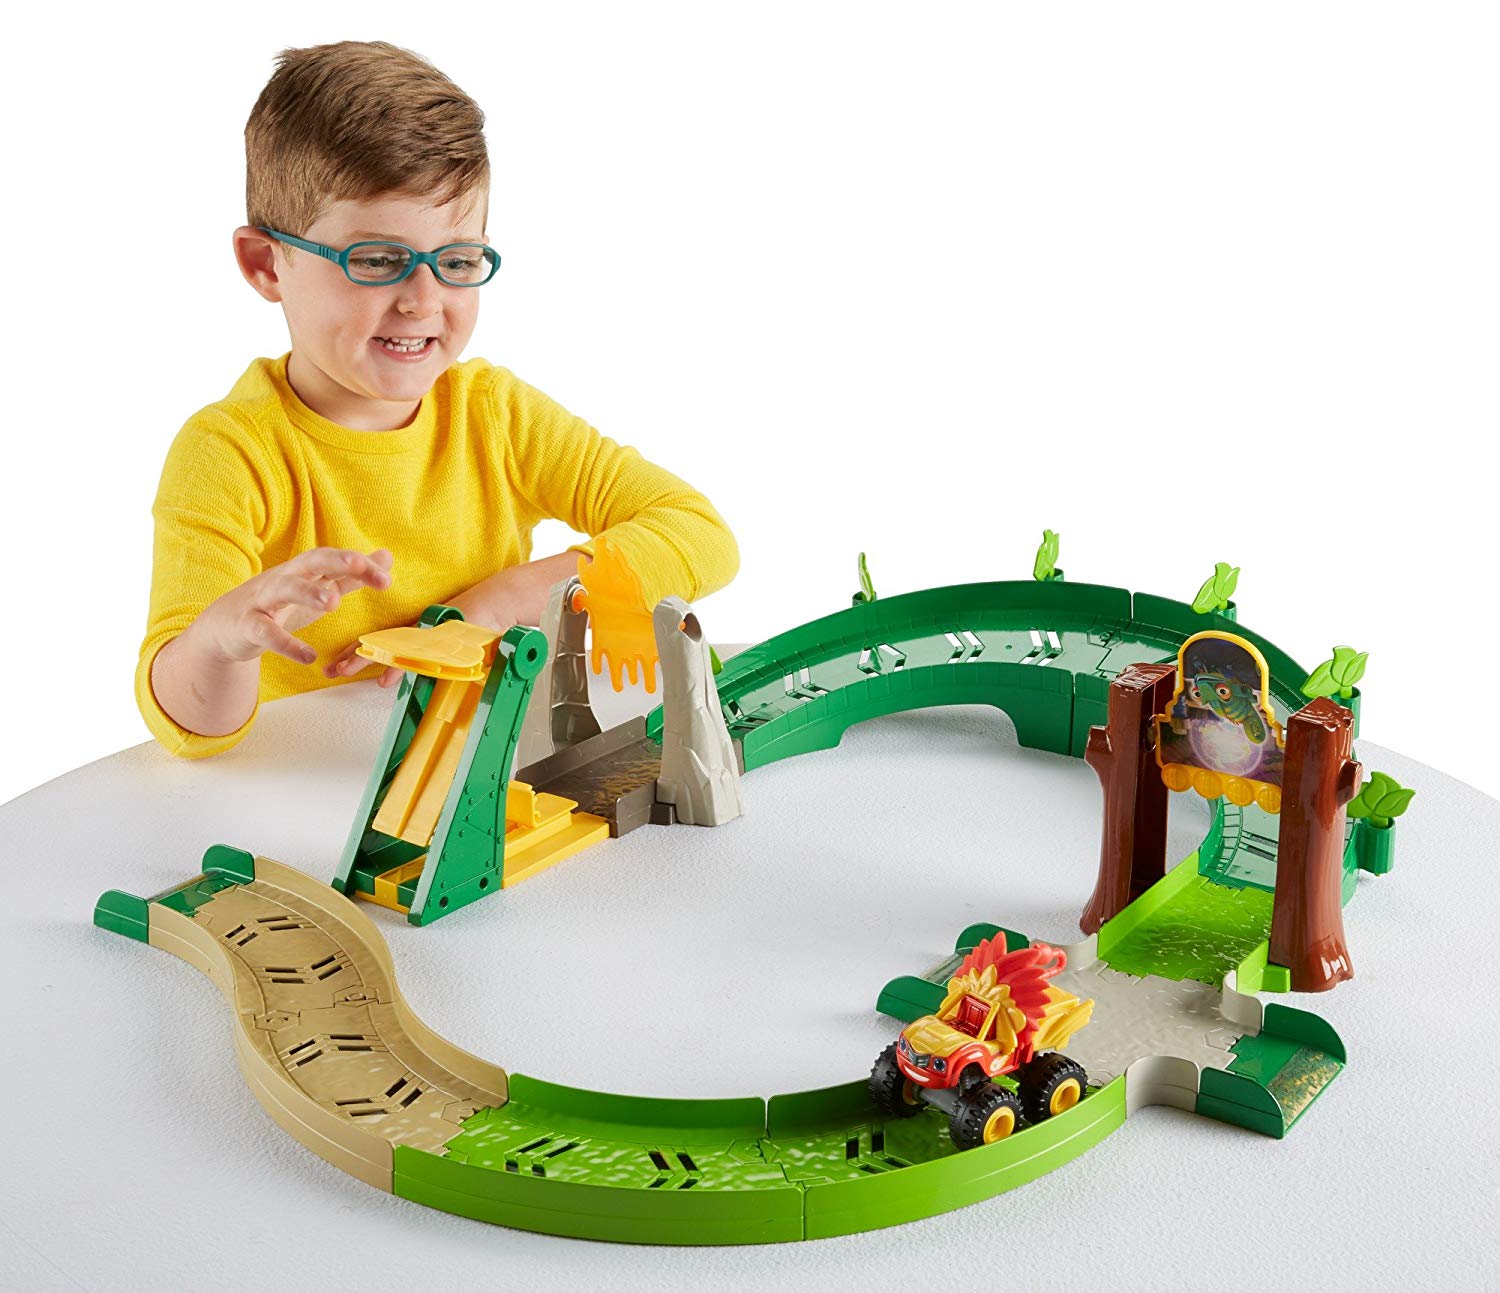 Playmed - Blaze and The Monster Machines™ Animal Island Track Set